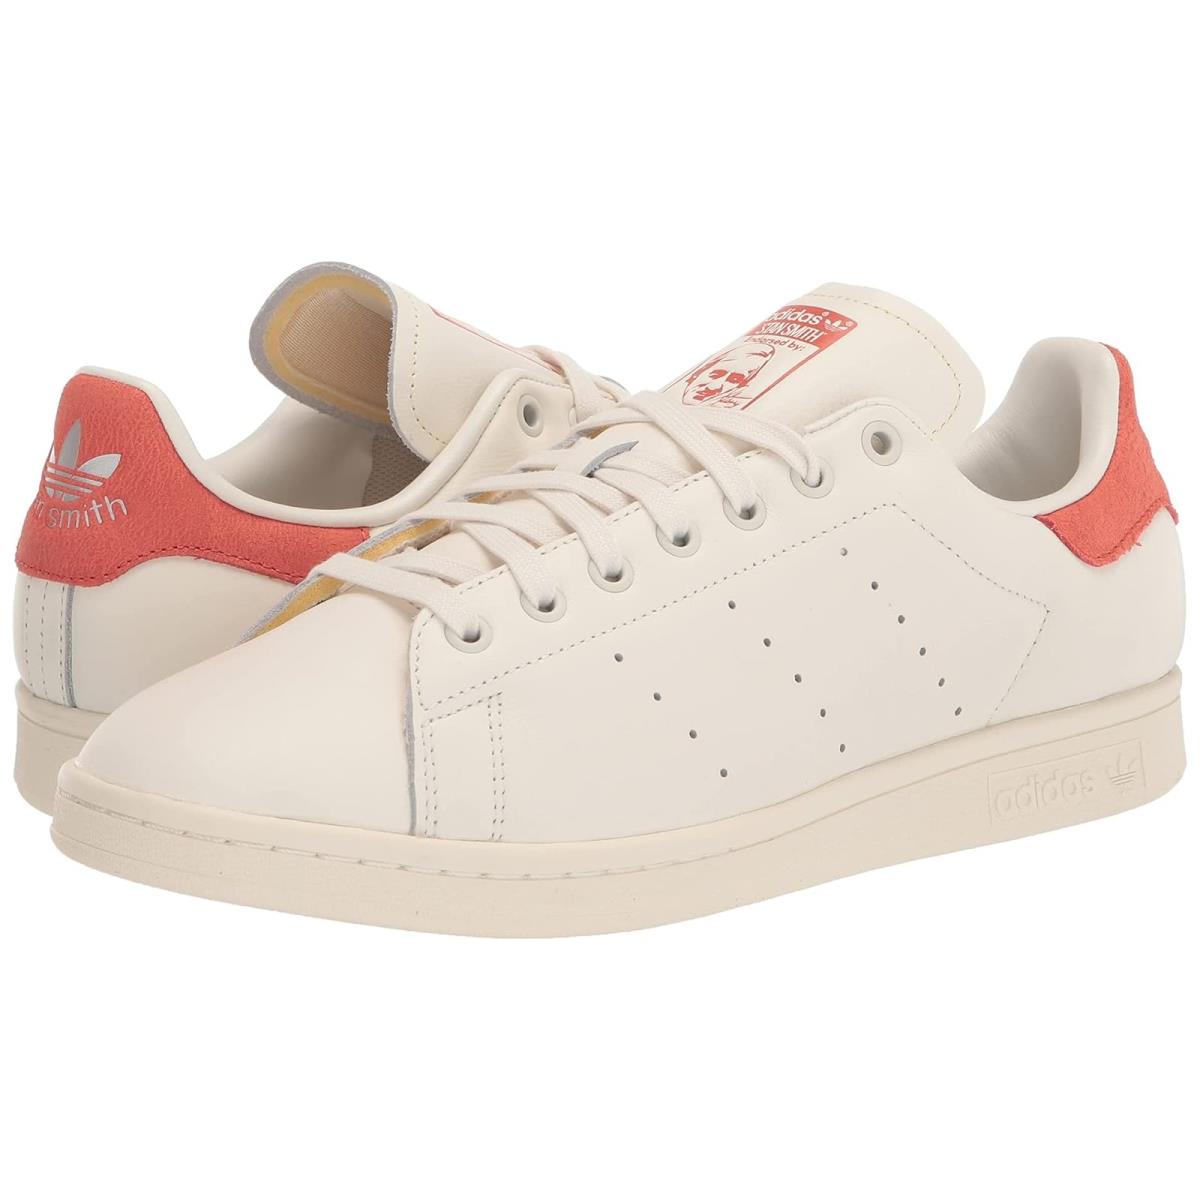 Man`s Sneakers Athletic Shoes Adidas Originals Stan Smith White/Off-White/Preloved Red